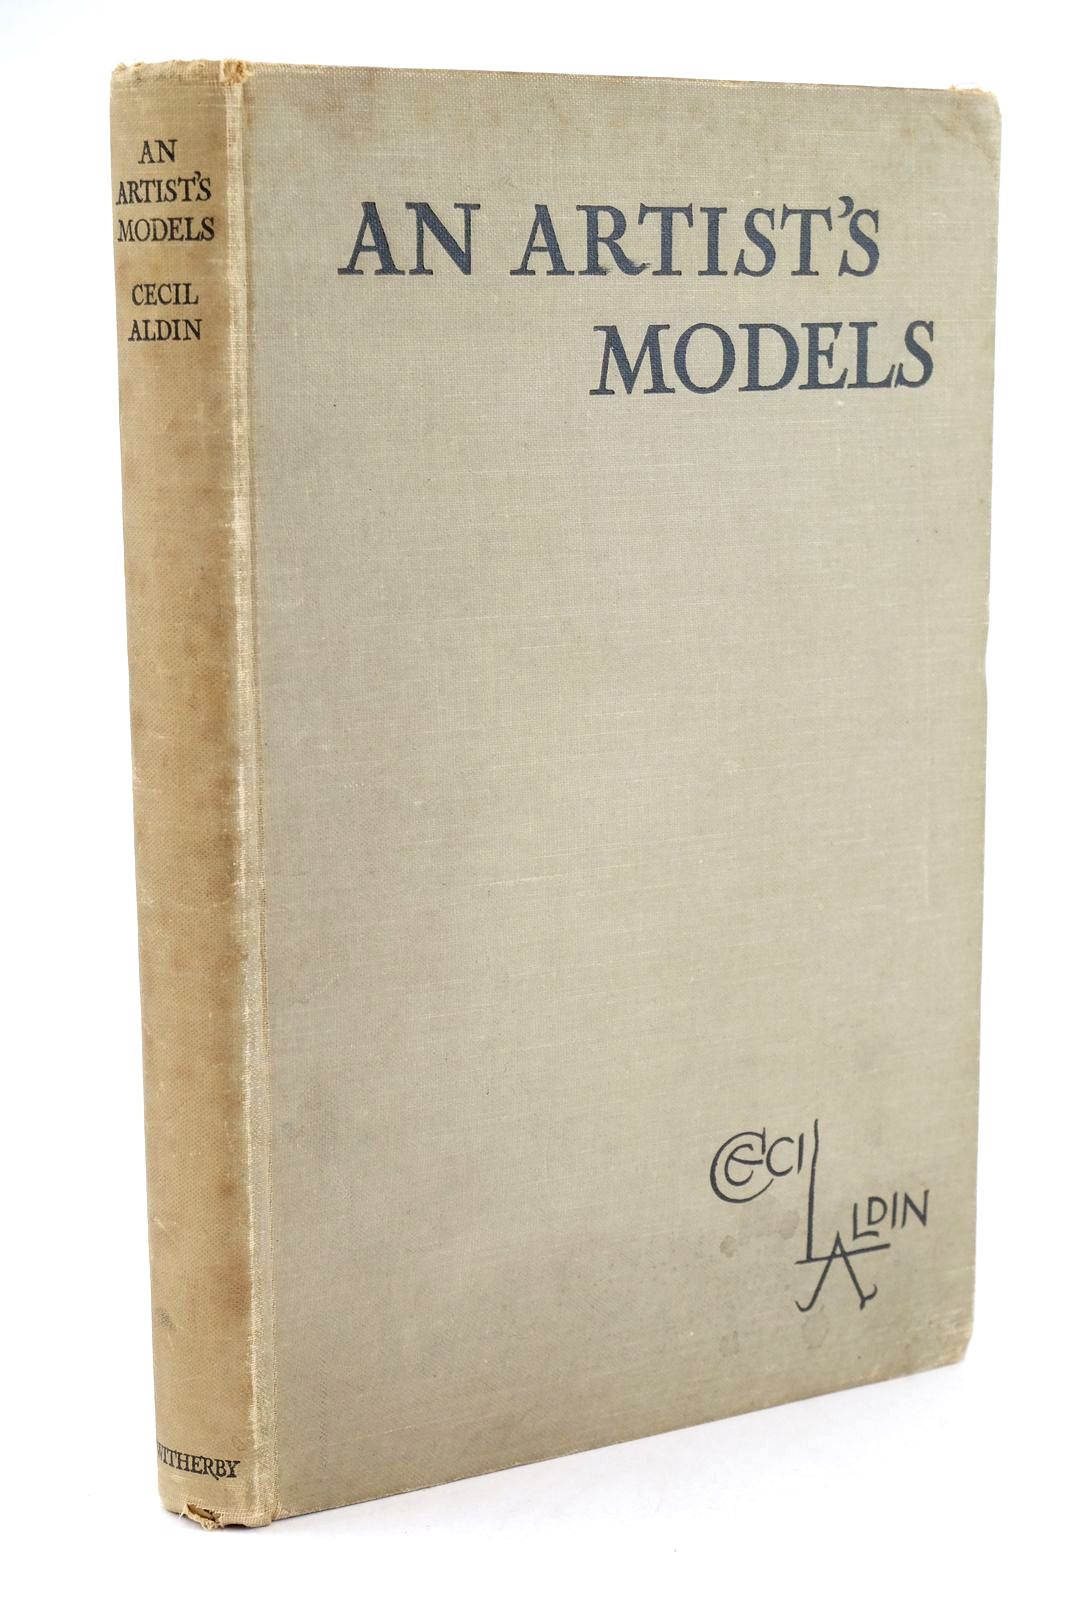 Photo of AN ARTIST'S MODELS written by Aldin, Cecil illustrated by Aldin, Cecil published by H. F. &amp; G. Witherby (STOCK CODE: 1323856)  for sale by Stella & Rose's Books